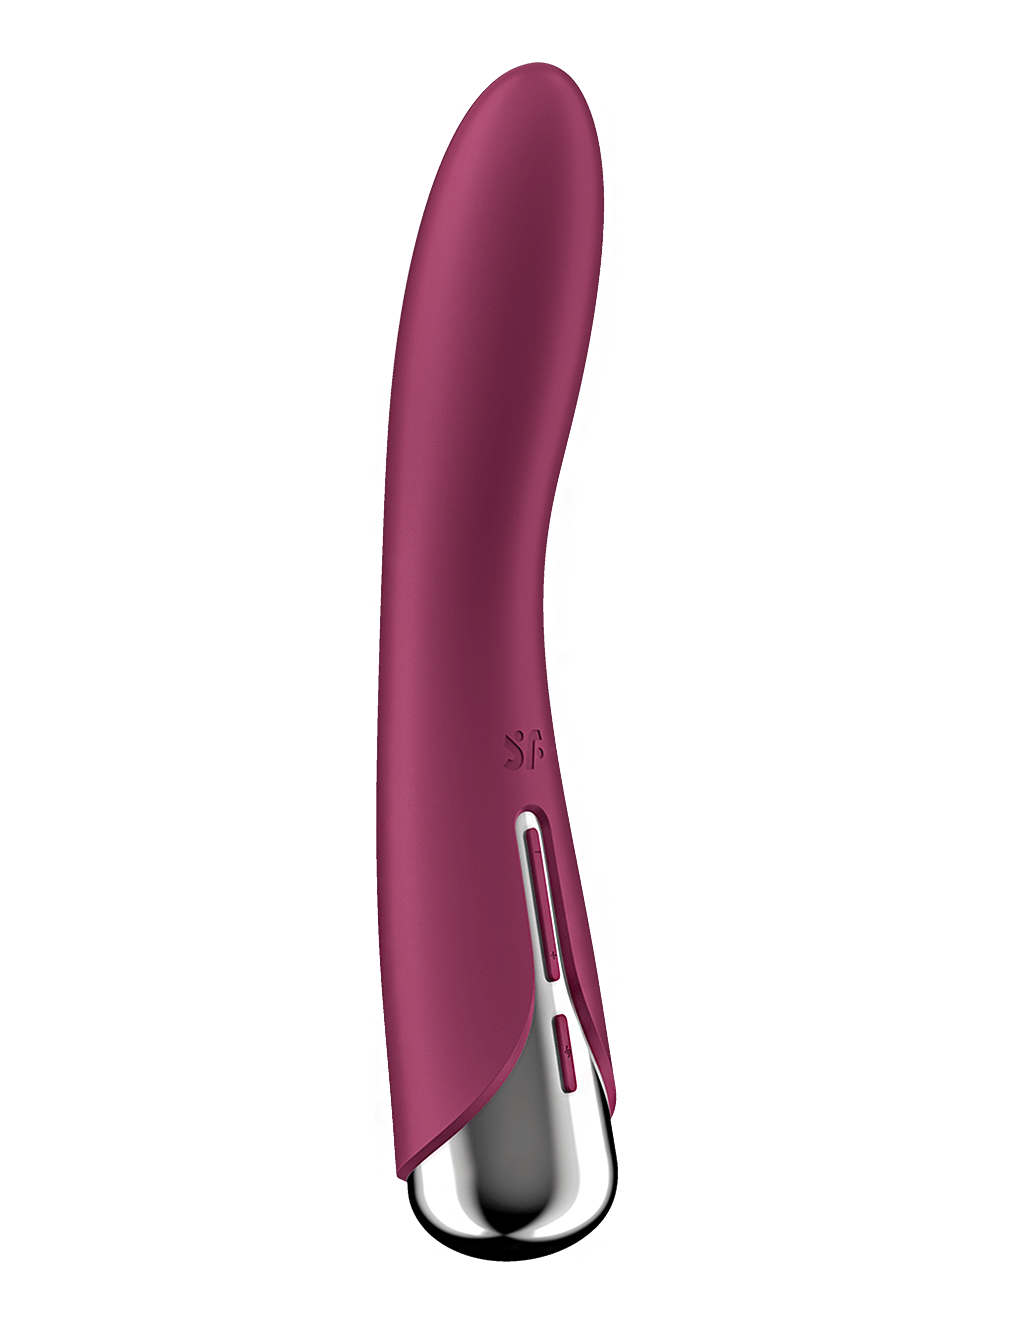 Satisfyer Spinning Vibe 1 - Red- Main